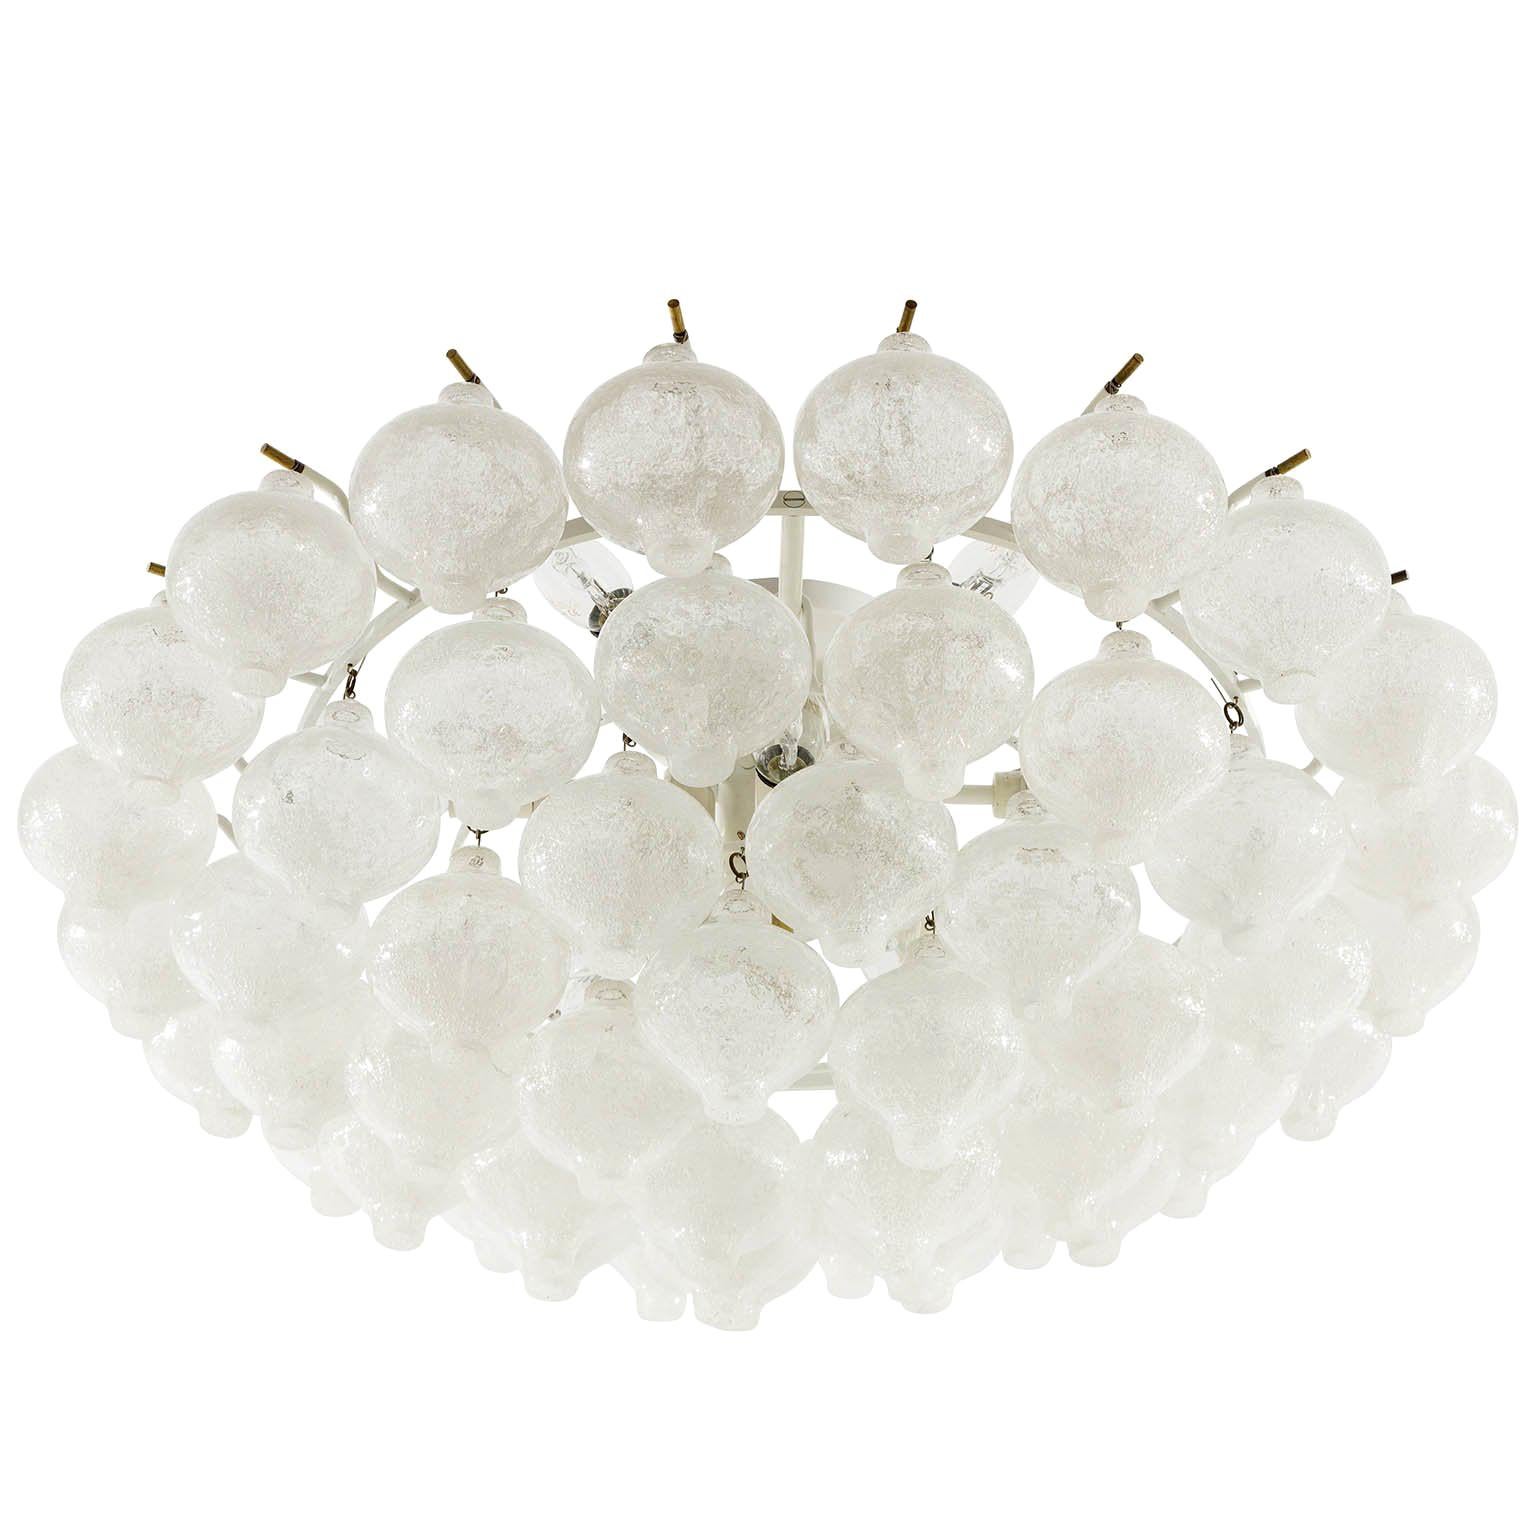 An extra large and gorgeous 'Tulipan' flush mount chandelier by J.T. Kalmar, Austria, Vienna, manufactured in midcentury, circa 1970, (late 1960s or early 1970s).
The price is per light.
The name Tulipan derives from the tulip shaped hand blown